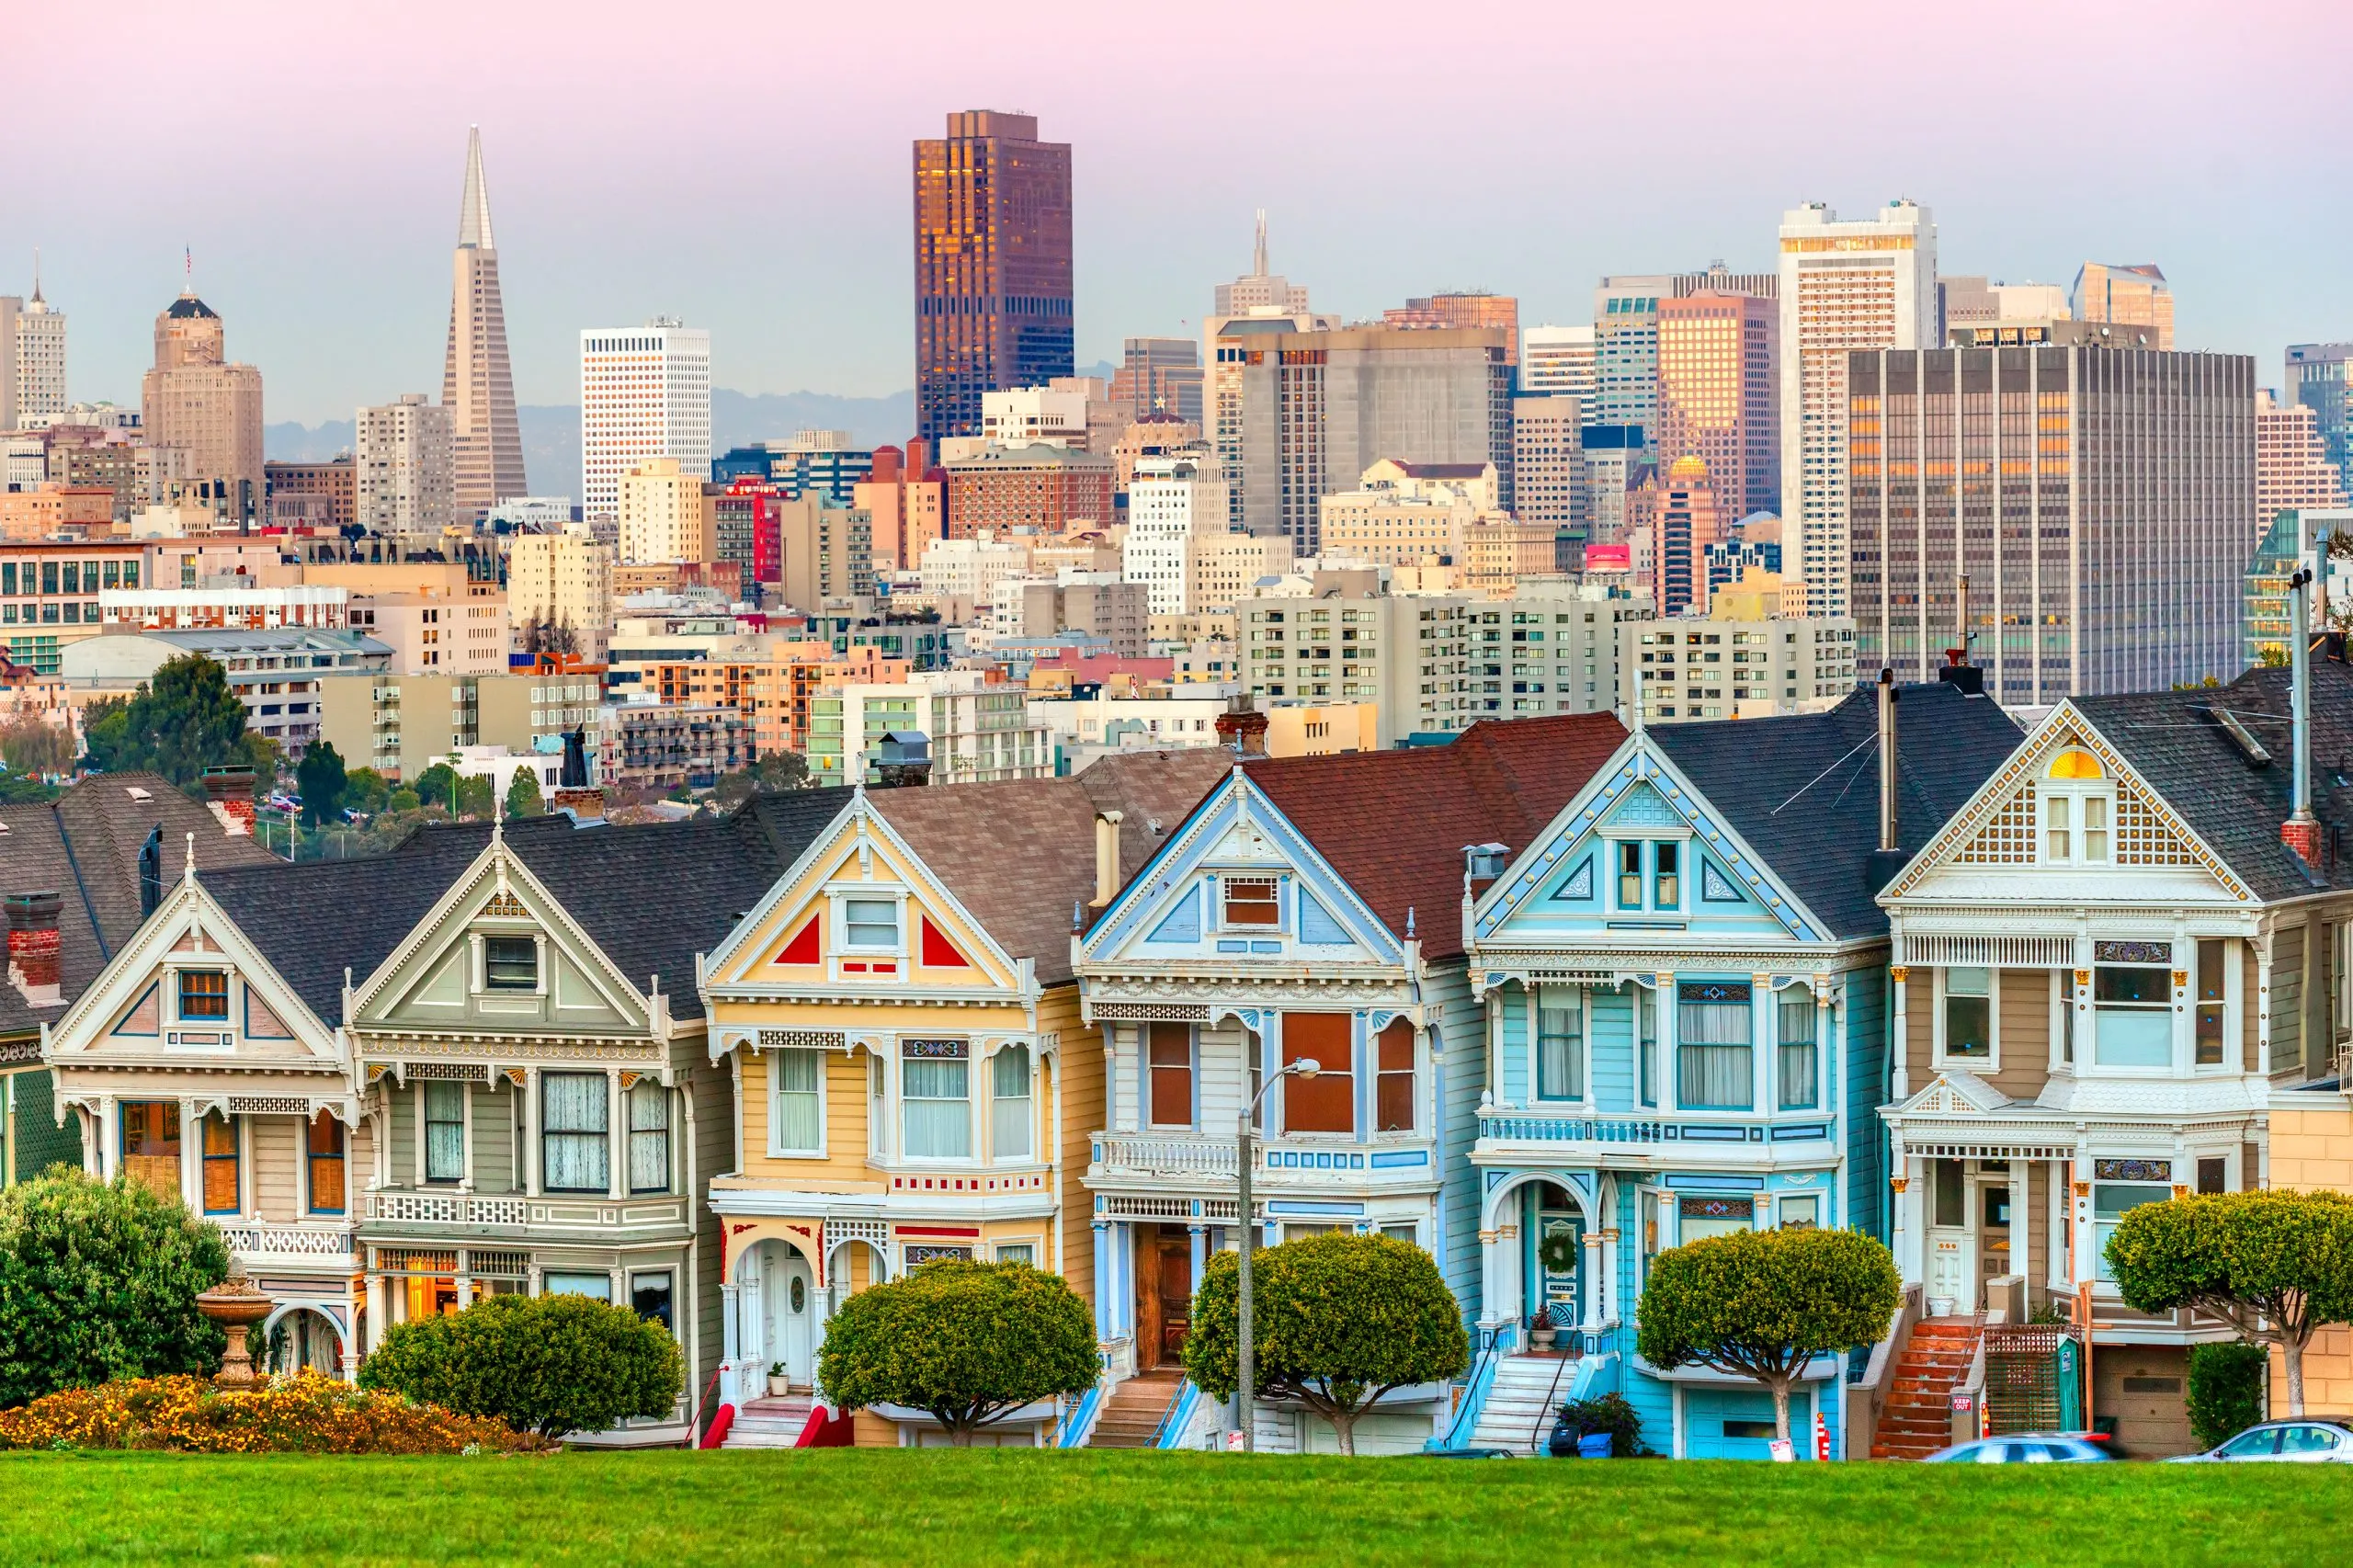 Painted ladies of San Francisco at sunset with skyline in the background, one of the best places to visit when spending 3 days in San Francisco CA